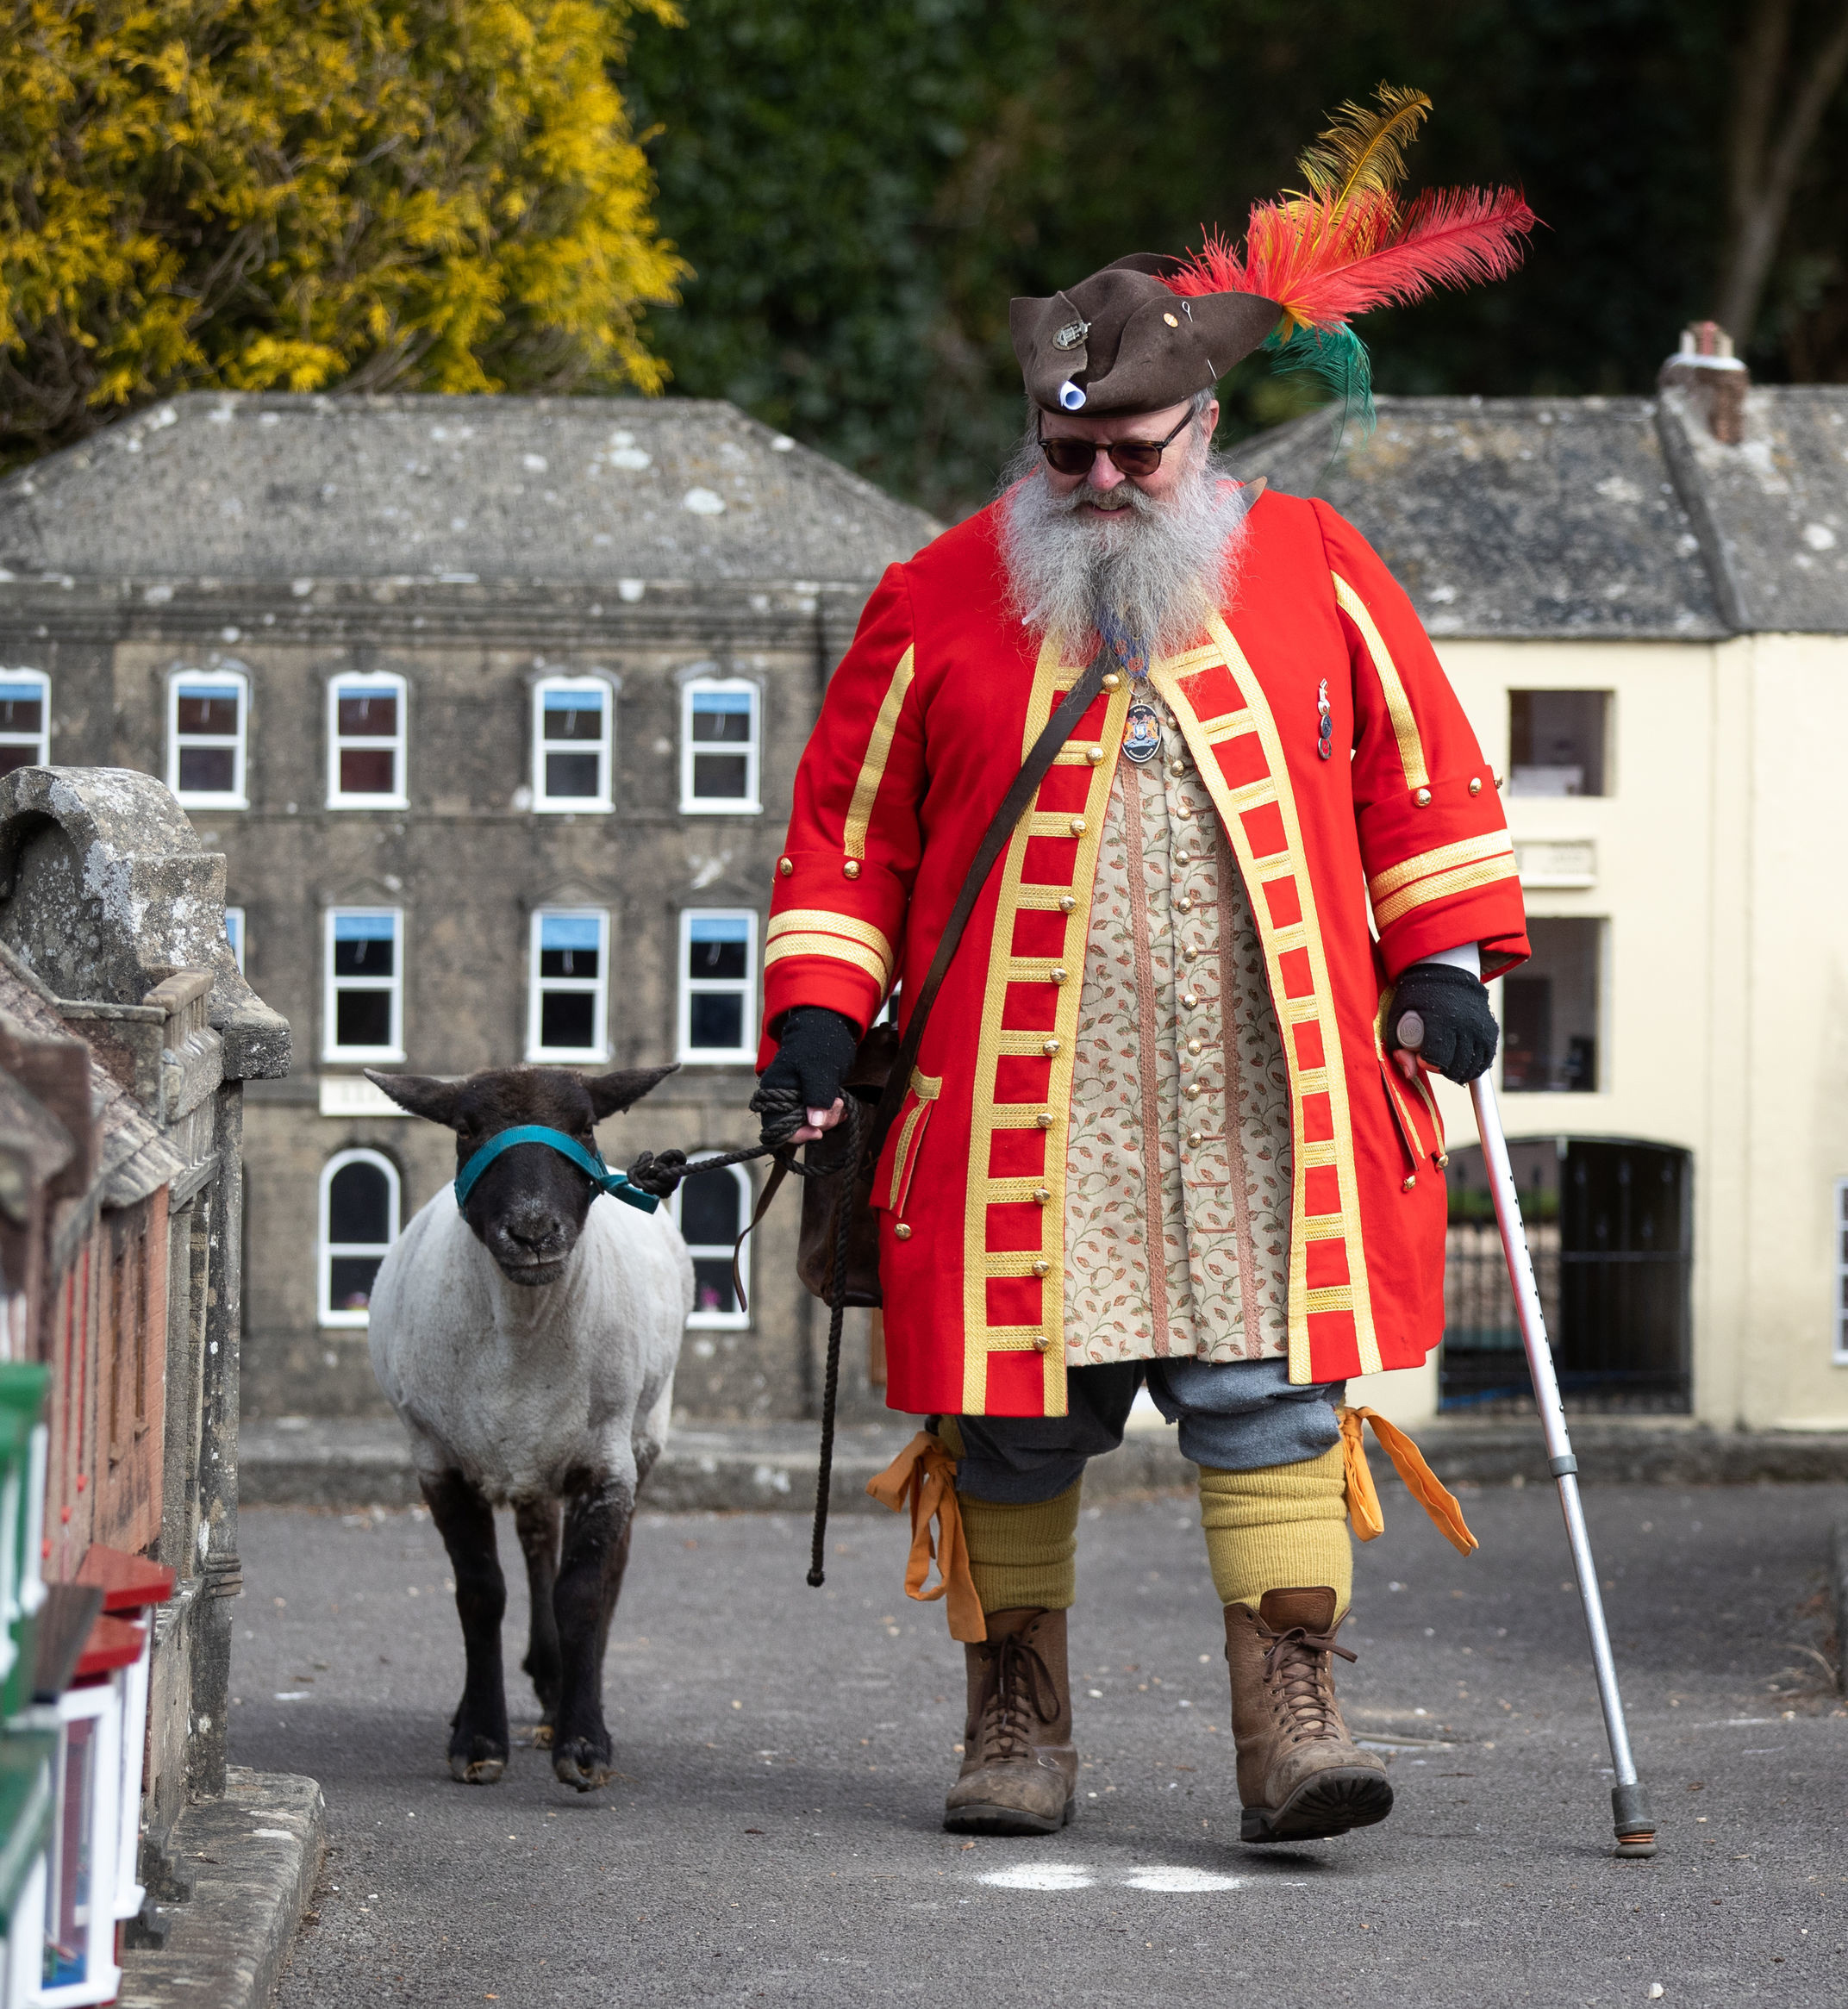 Chris Brown, the Town Crier and Mayors Serjant of Wimborne Minster, in Dorset, exercises his right as an Honorary Freeman to drive sheep through Wimborne without charge, albeit through the Wimborne Model Town, to herald their re-opening on 12th April